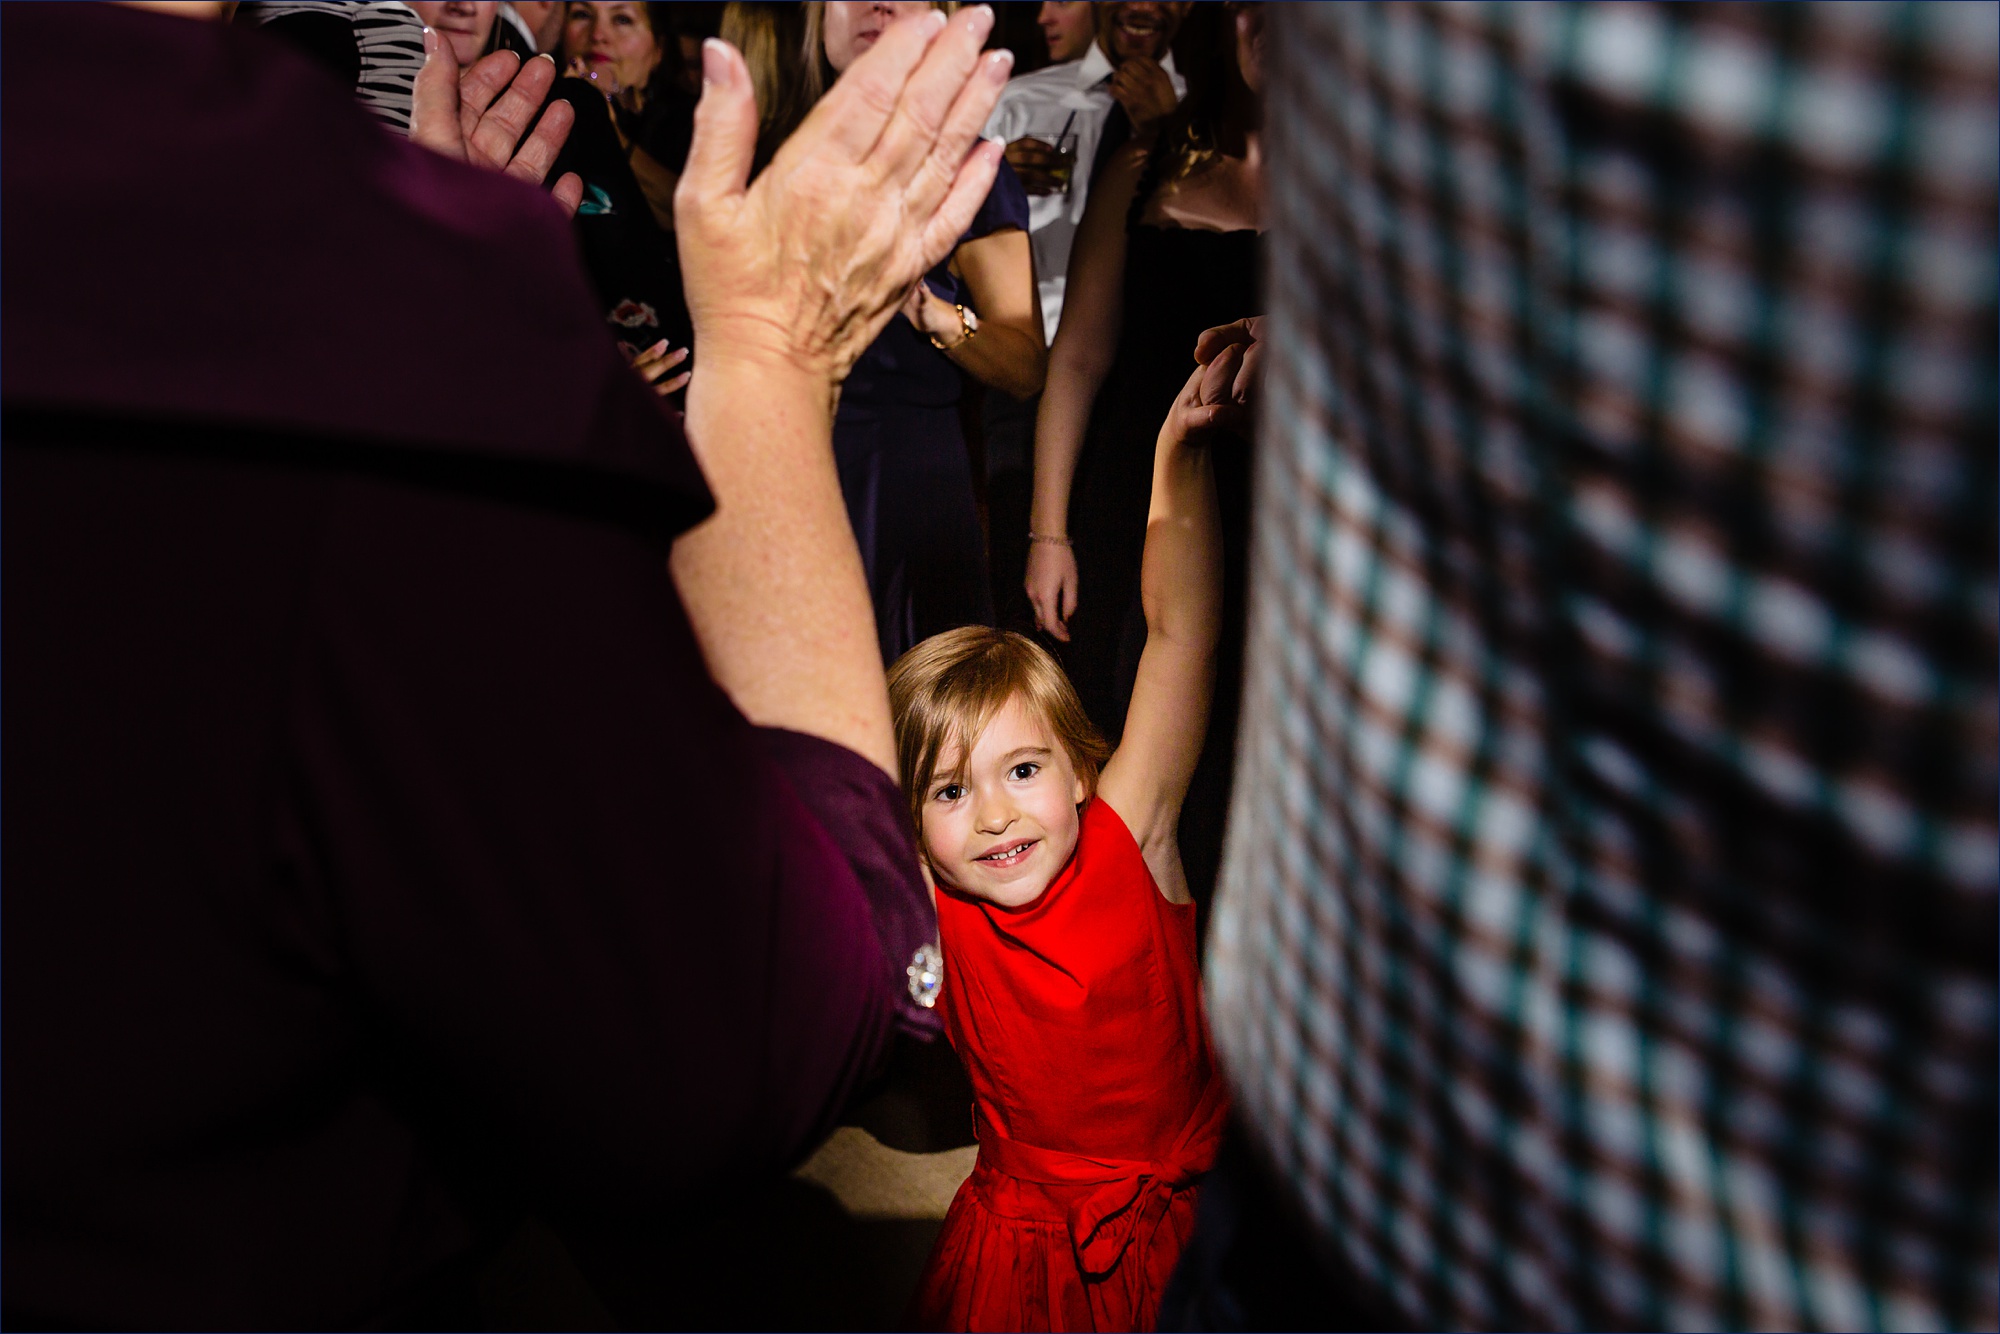 Little guests enjoying the dance floor at the southern Maine wedding